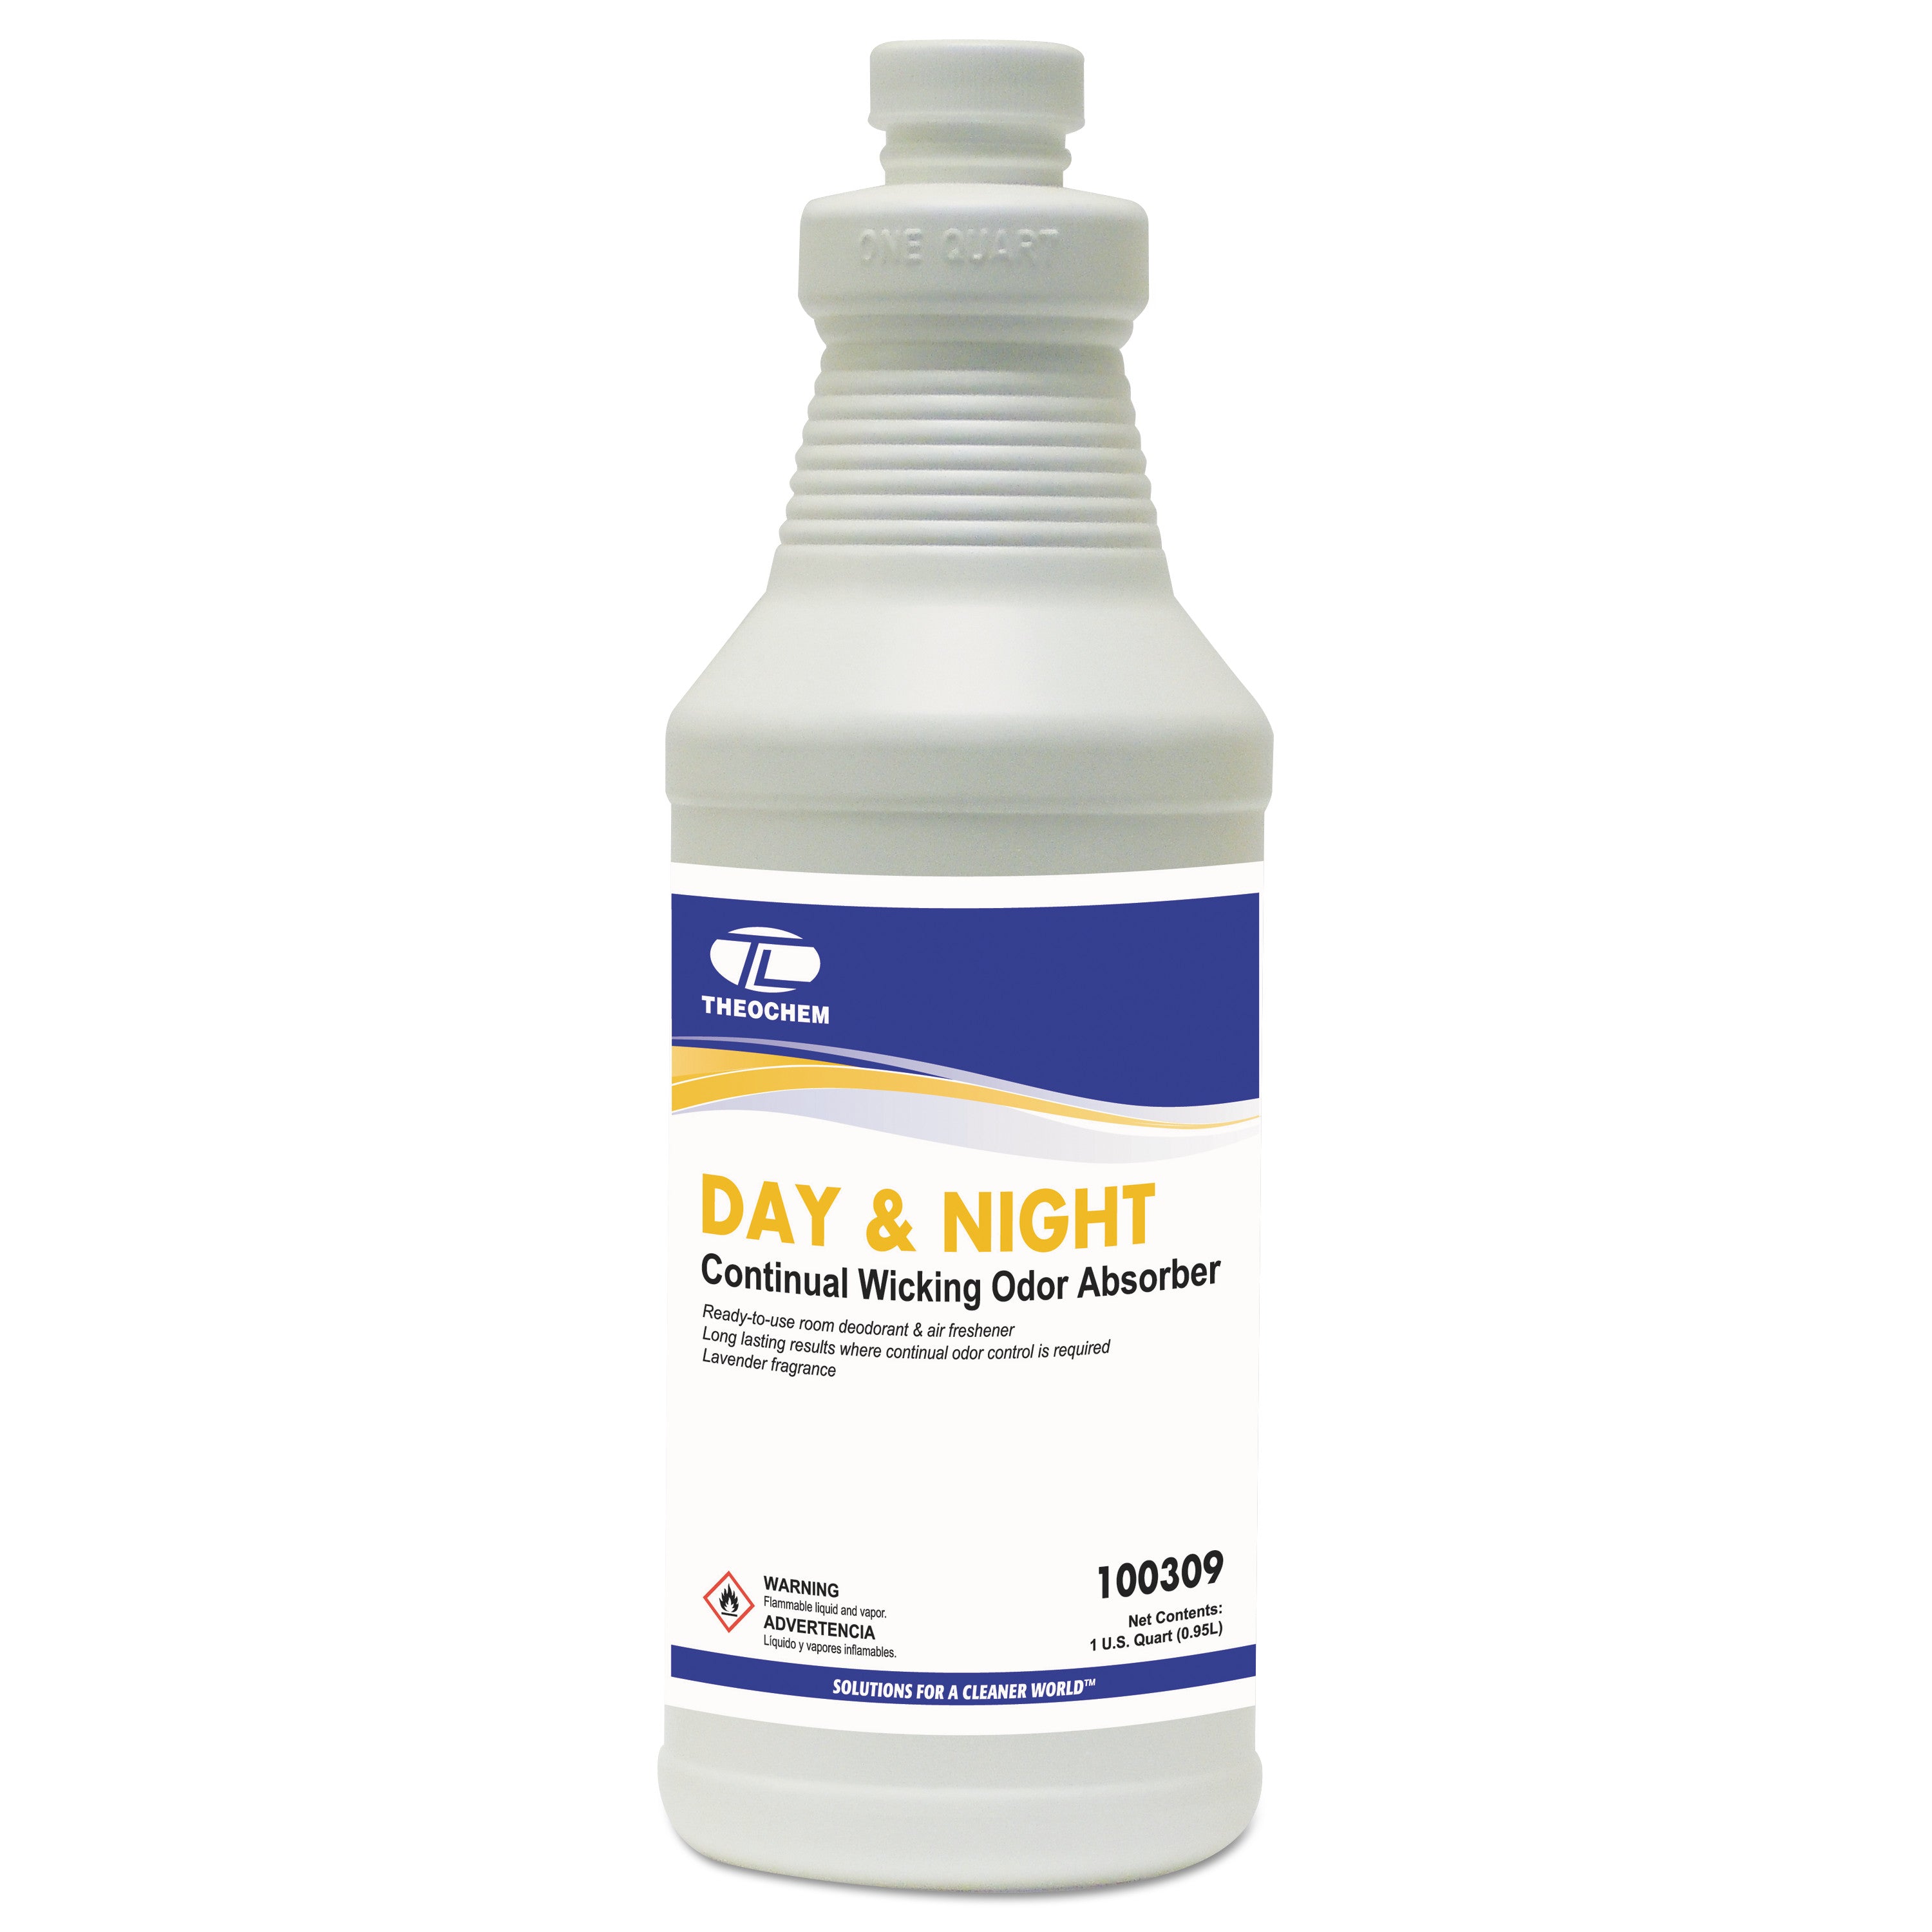 day-and-night-wicking-odor-absorber-32-oz-bottle-lavender-12-carton_tol309qt - 1